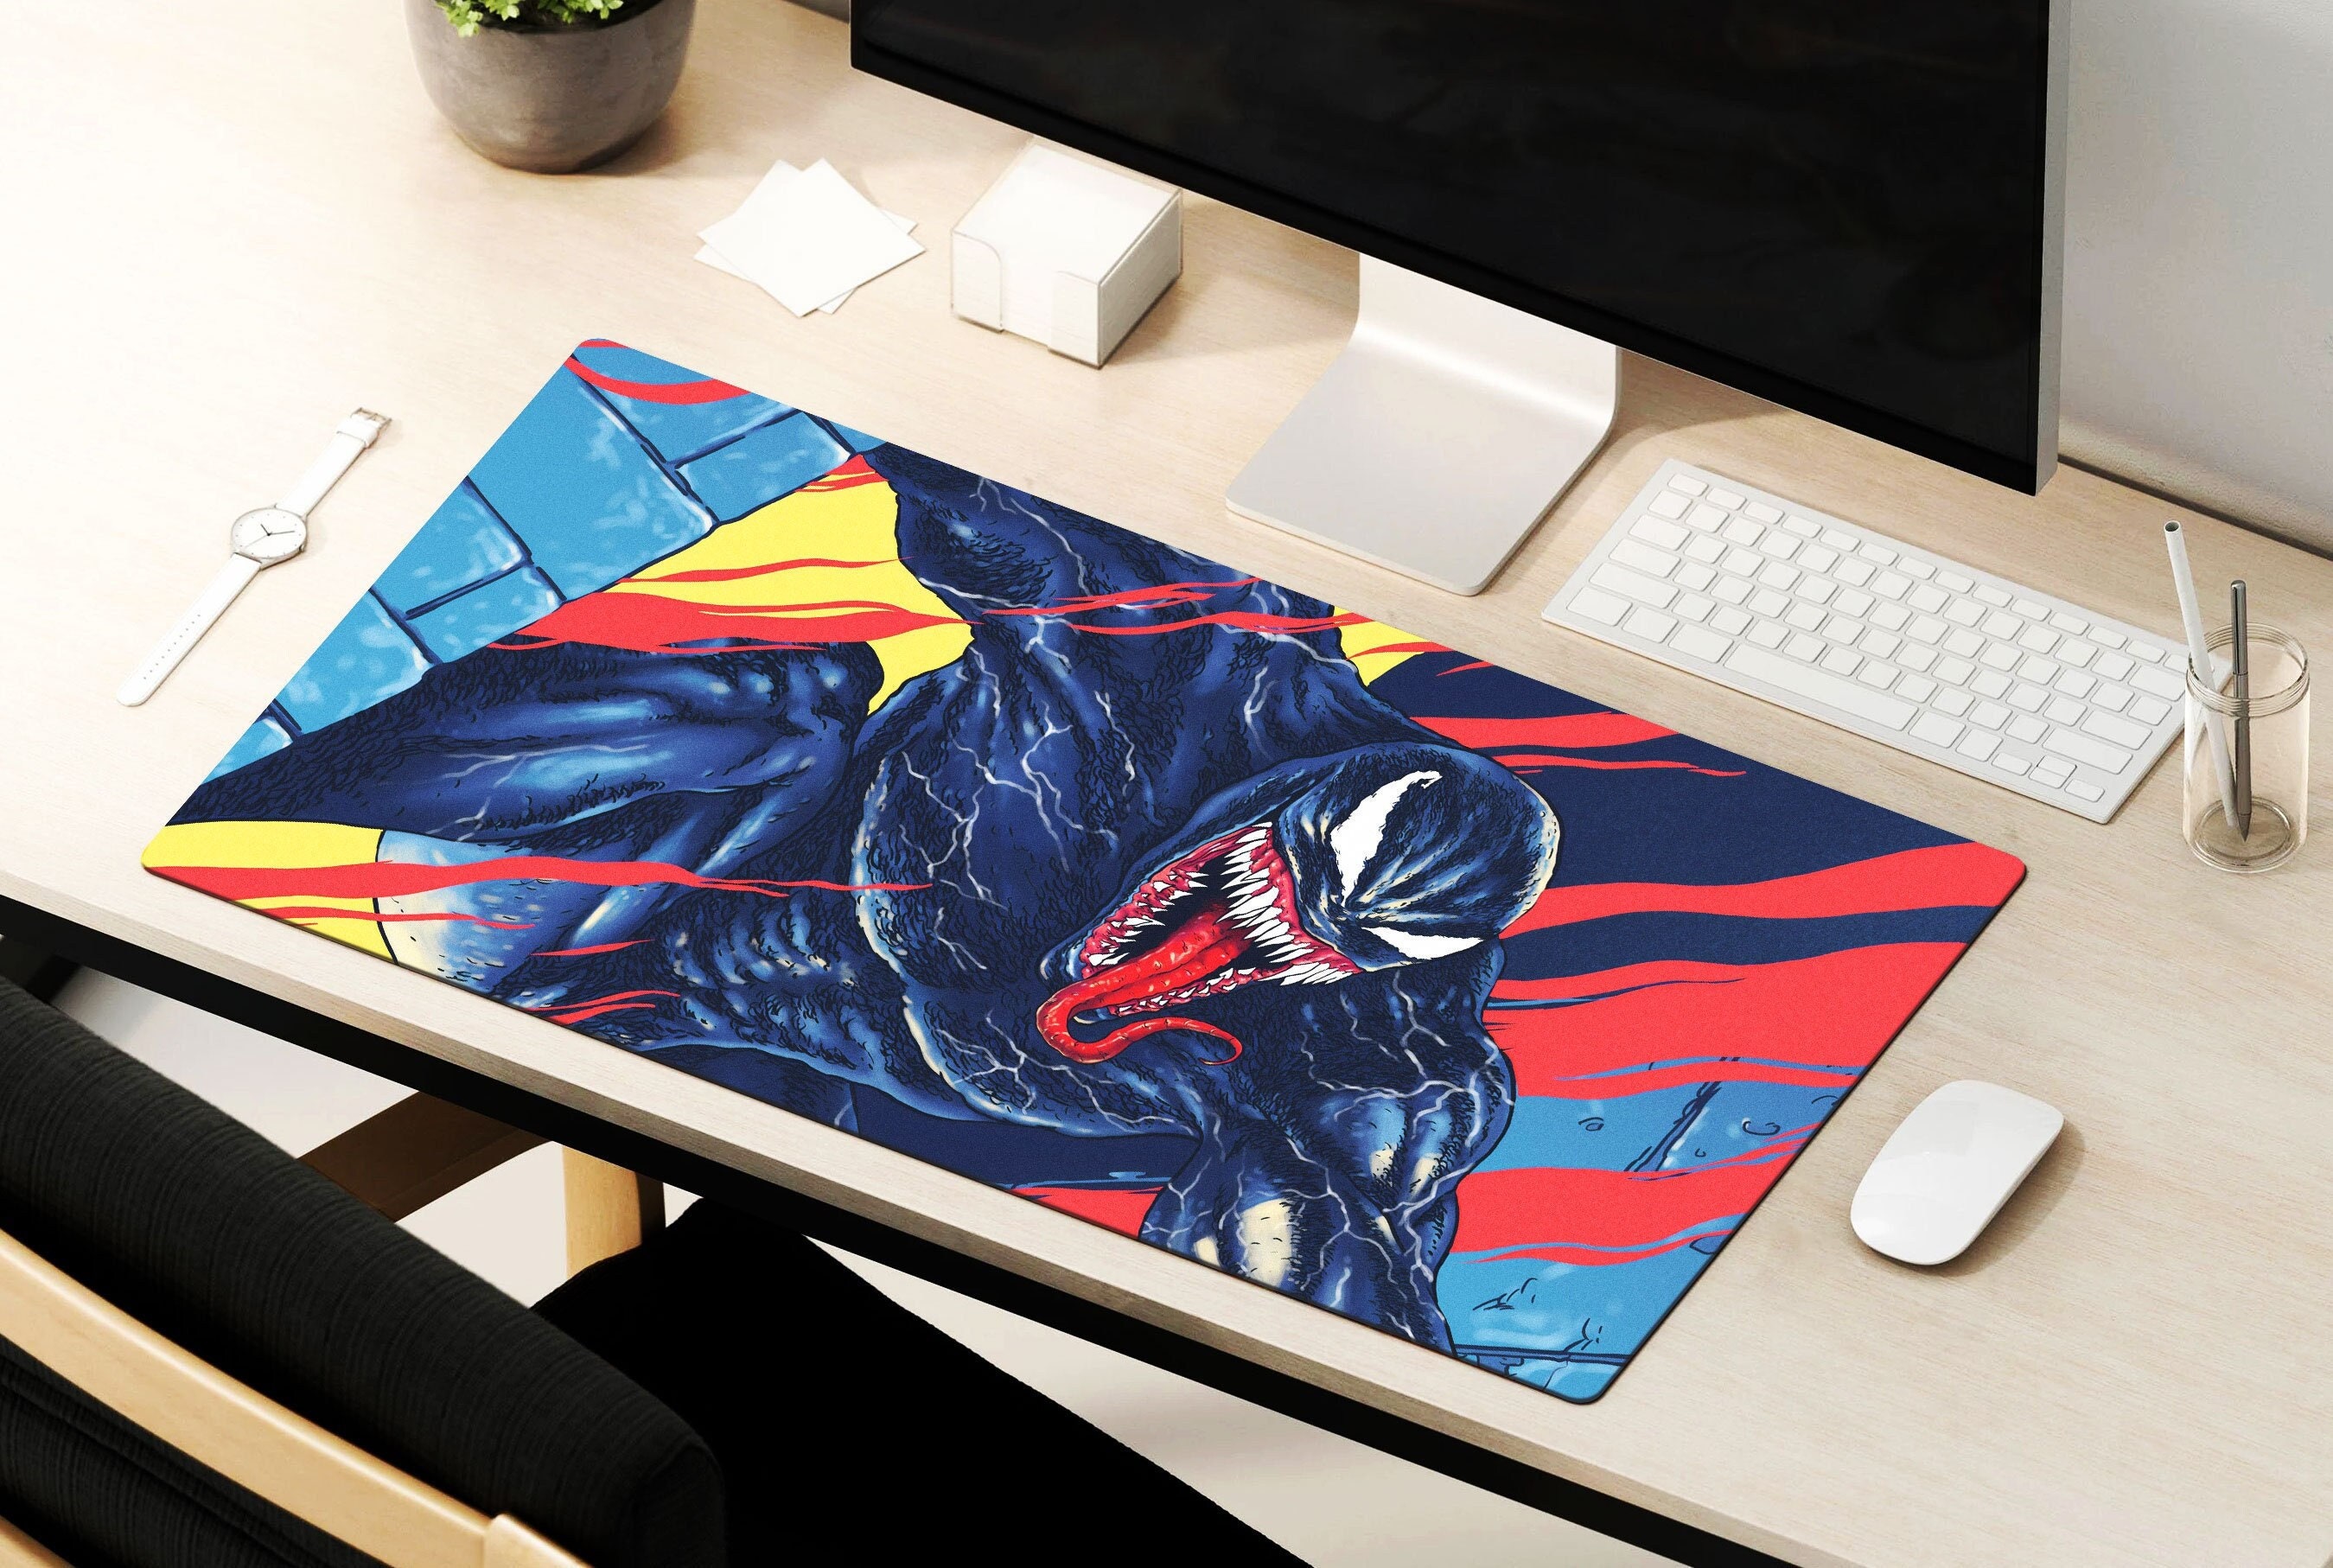 Spiderman Gaming Mousepad Birthday Gifts for Gamers Gifts Computer Desk Mat  Gaming Desk Pad Mousepad Gaming Decor Desk Accessories for Men 